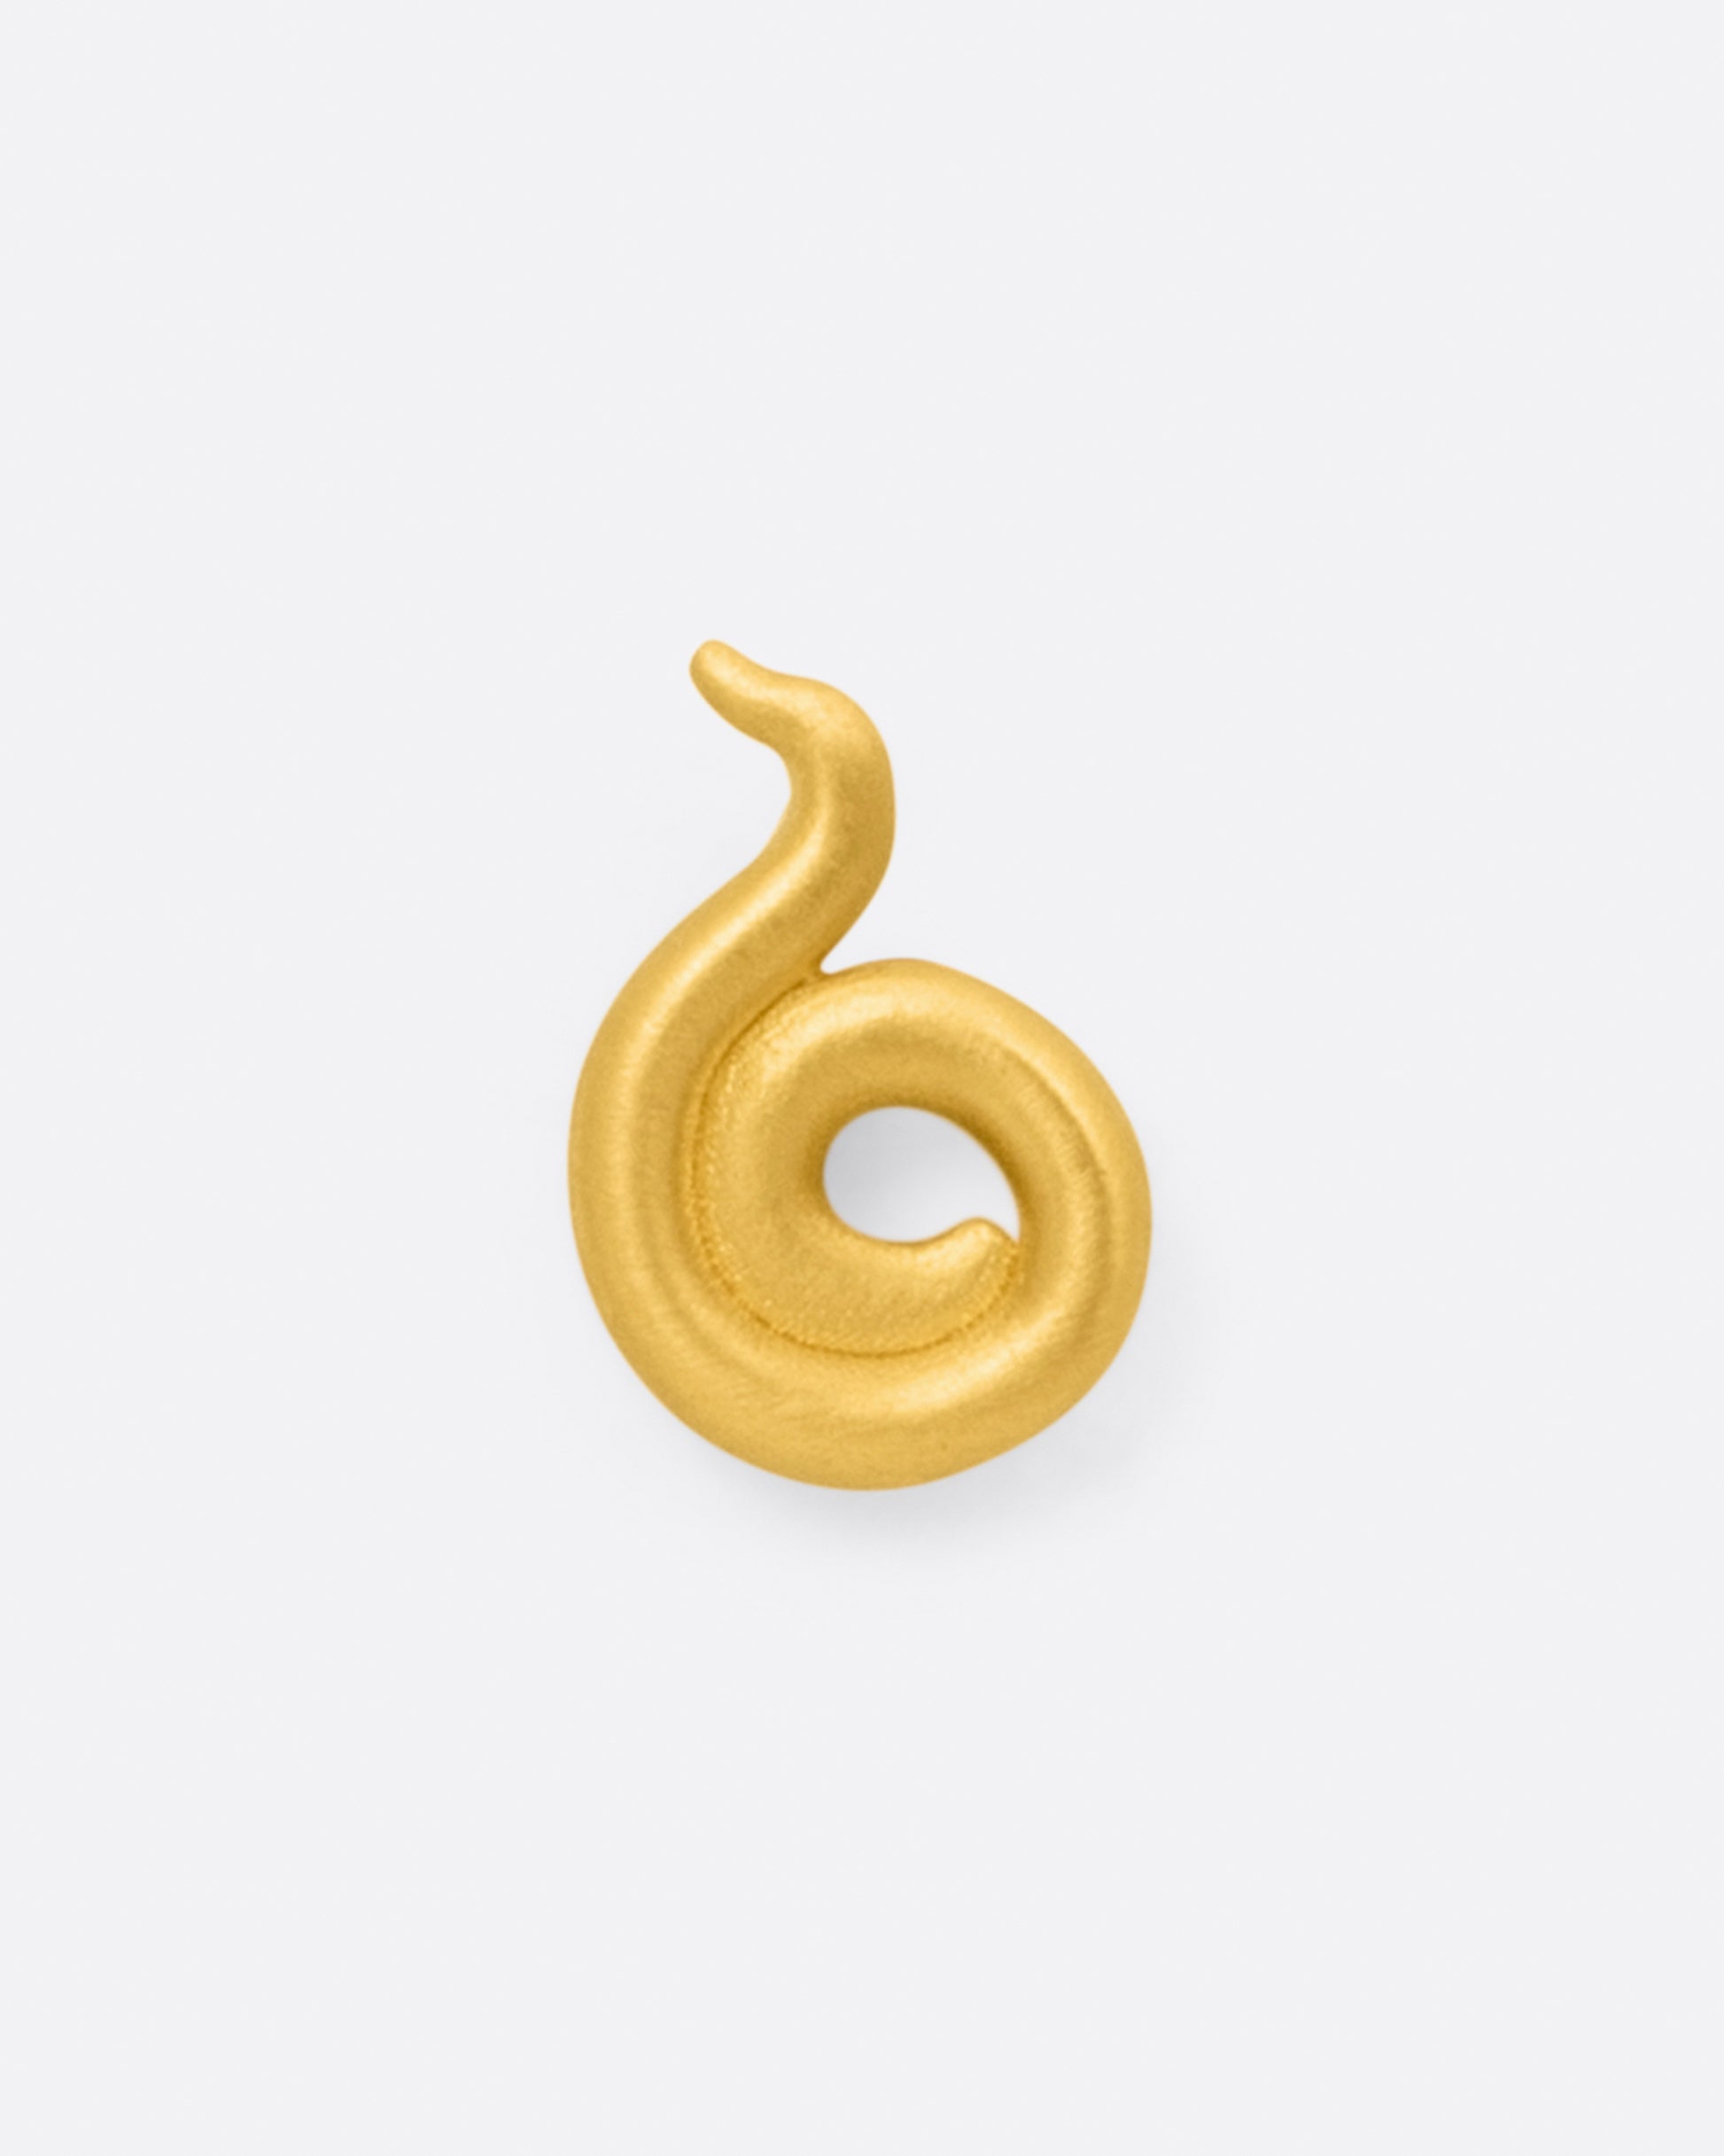 A coiled 22k yellow gold stud earring, shown from the front.